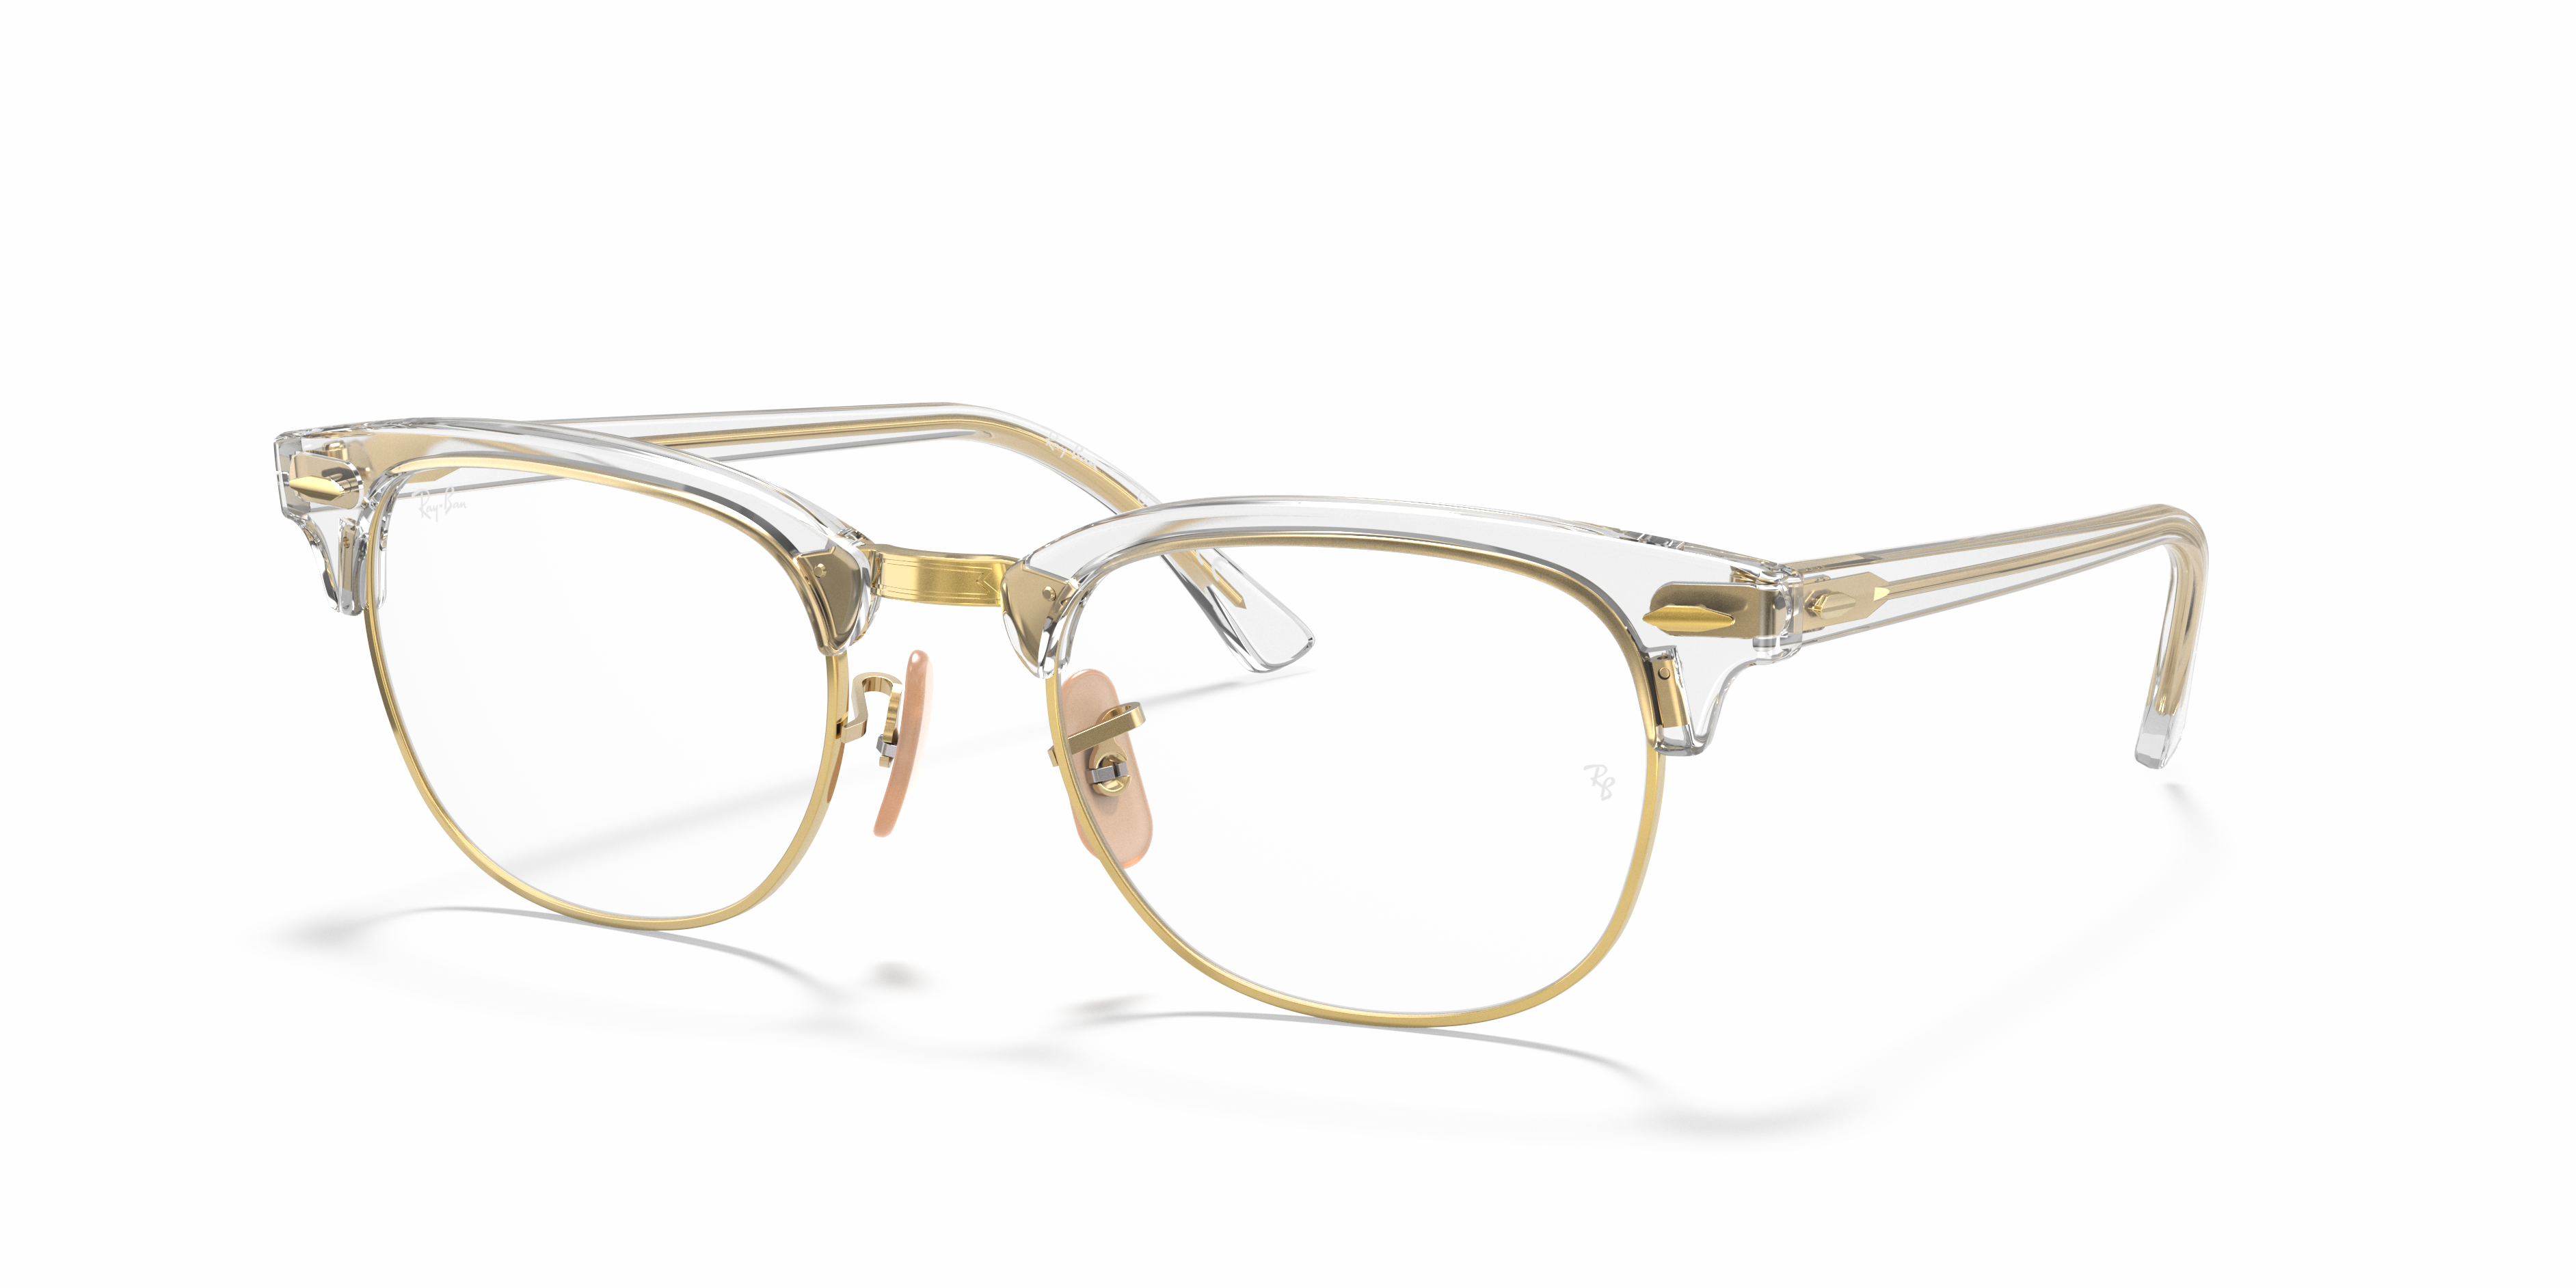 CLUBMASTER OPTICS Eyeglasses with Transparent Frame - RB5154 | Ray 